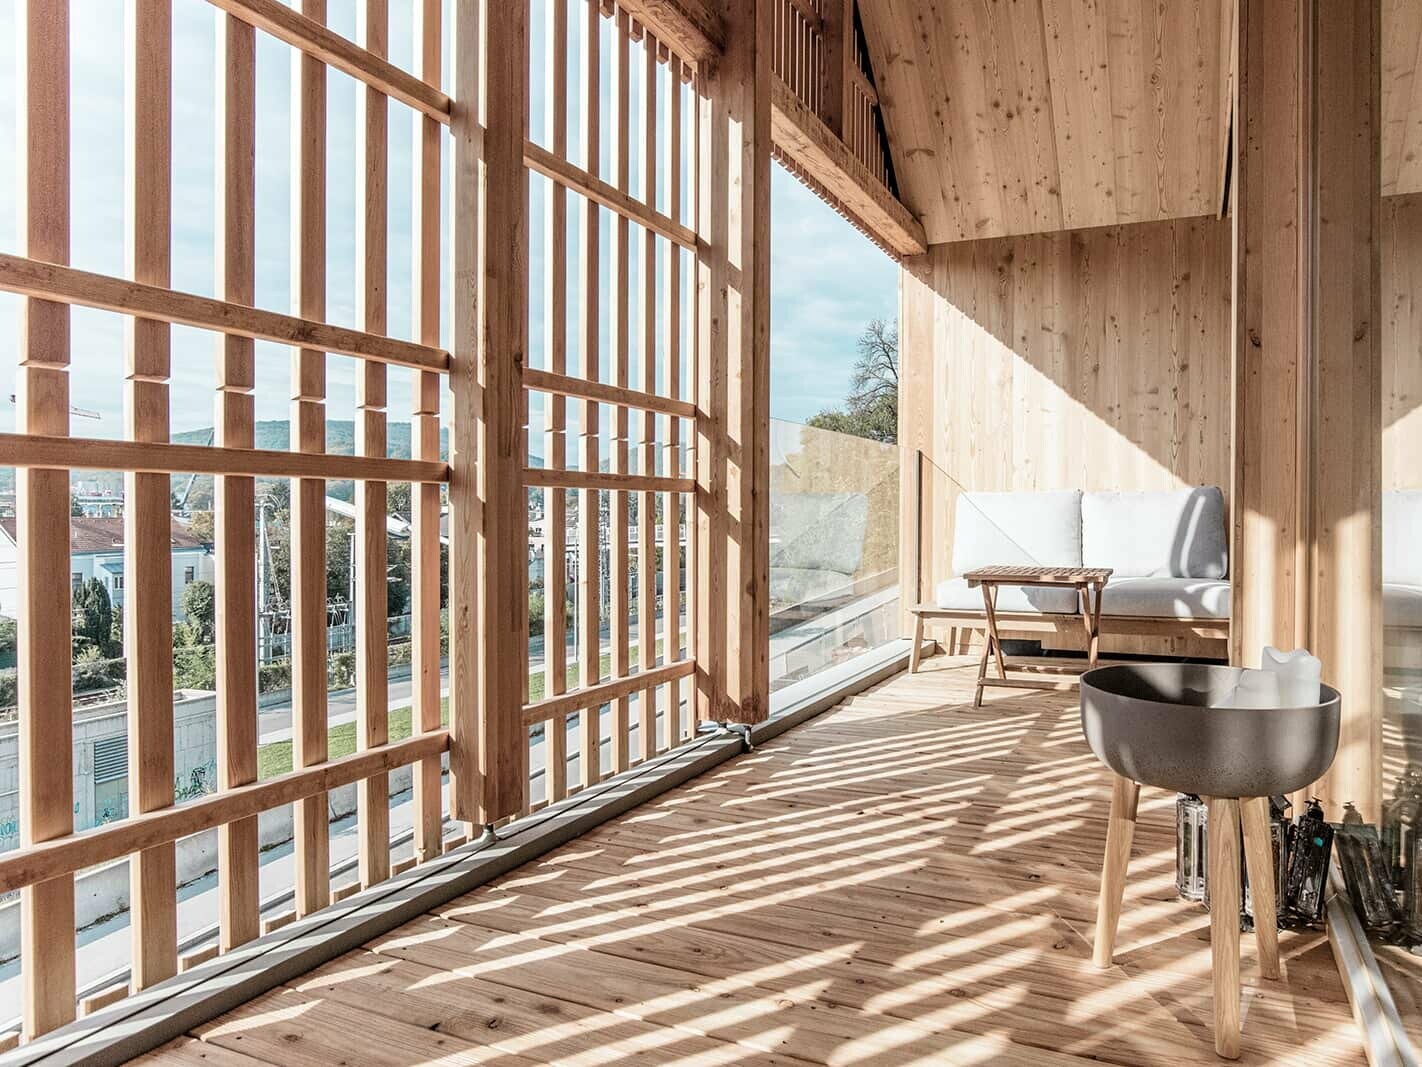 Interior view of the detached house in Vienna, Austria. Inside, the used wood is reflected. A little table and couch are illuminated by the sun, the wooden slats casts striped shadows.